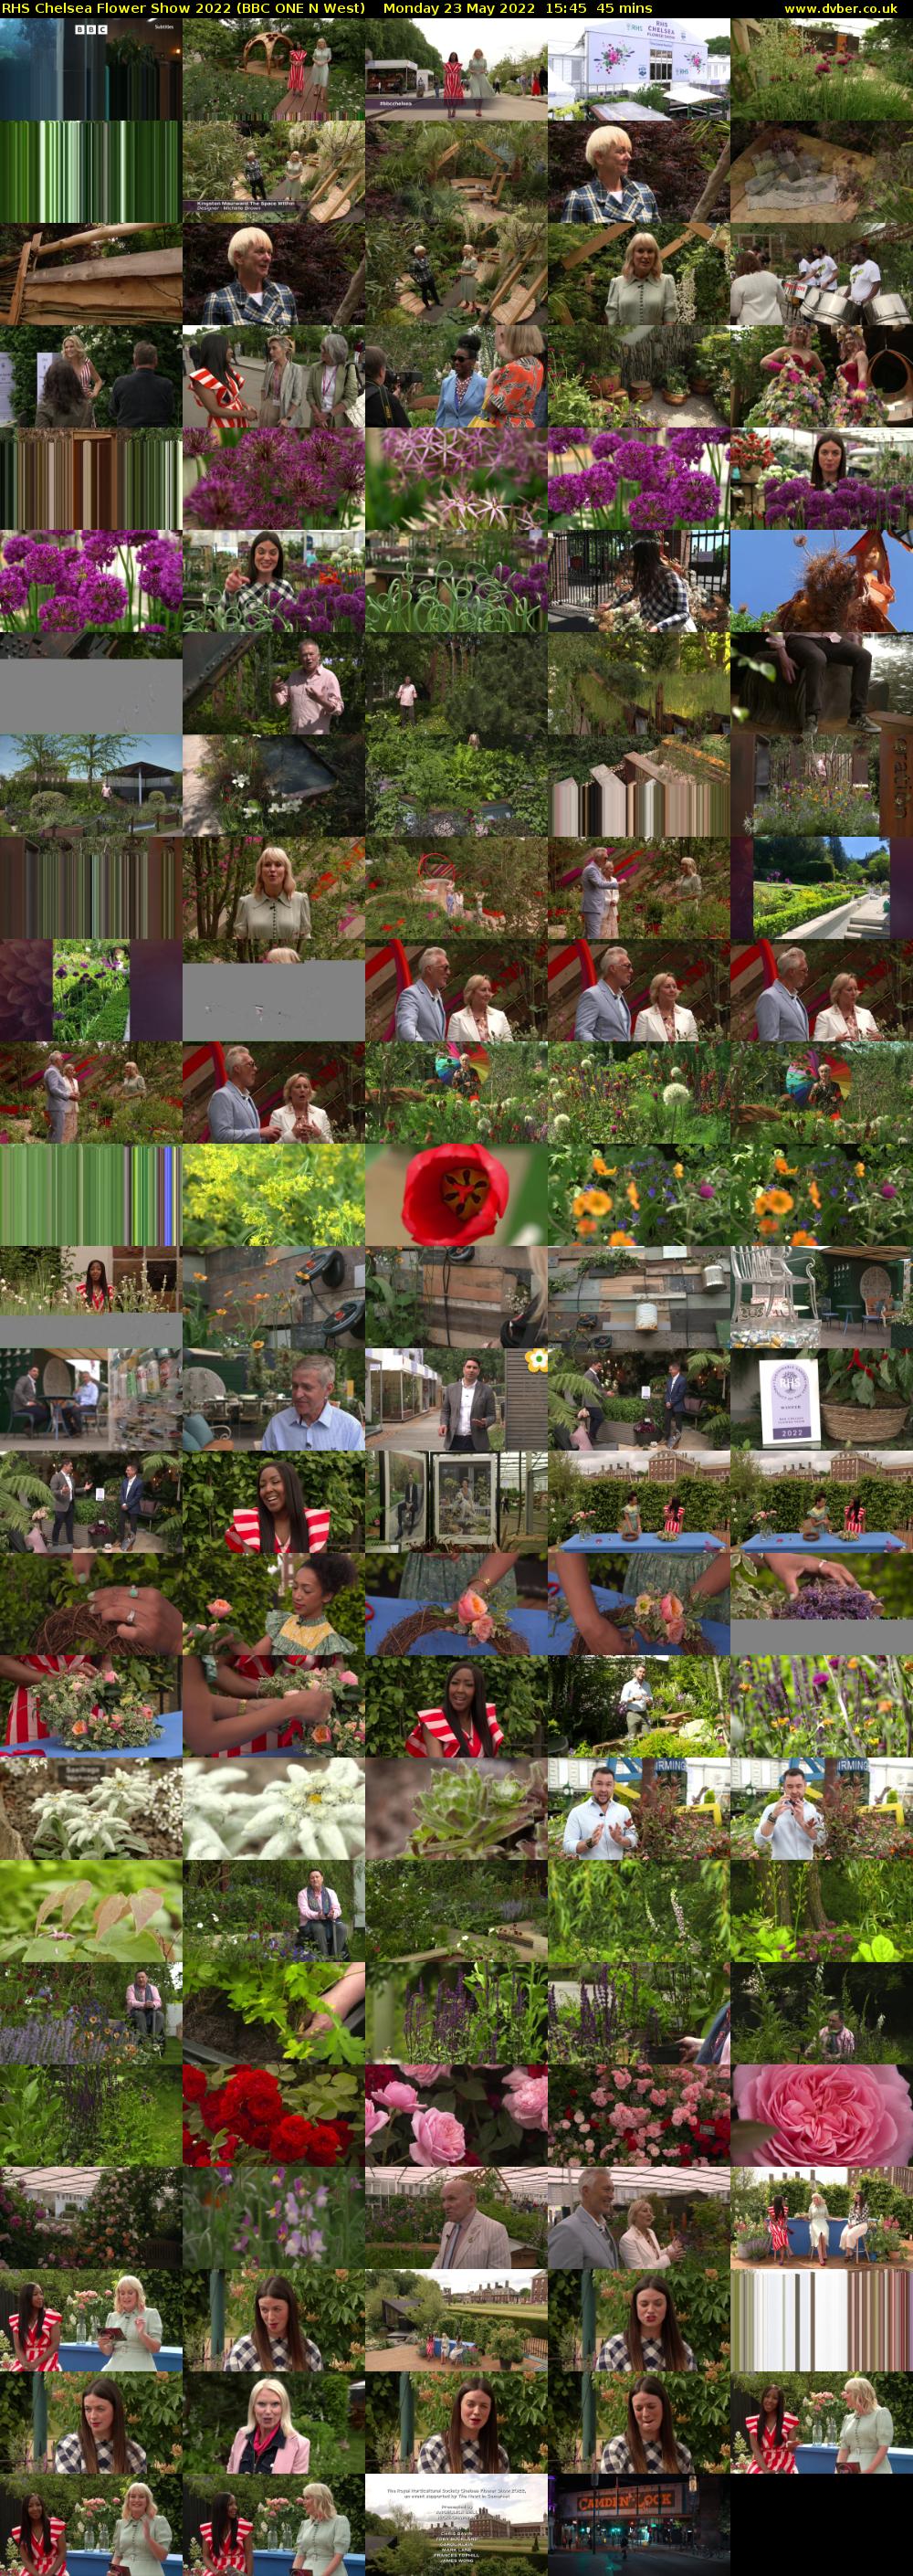 RHS Chelsea Flower Show 2022 (BBC ONE N West) Monday 23 May 2022 15:45 - 16:30